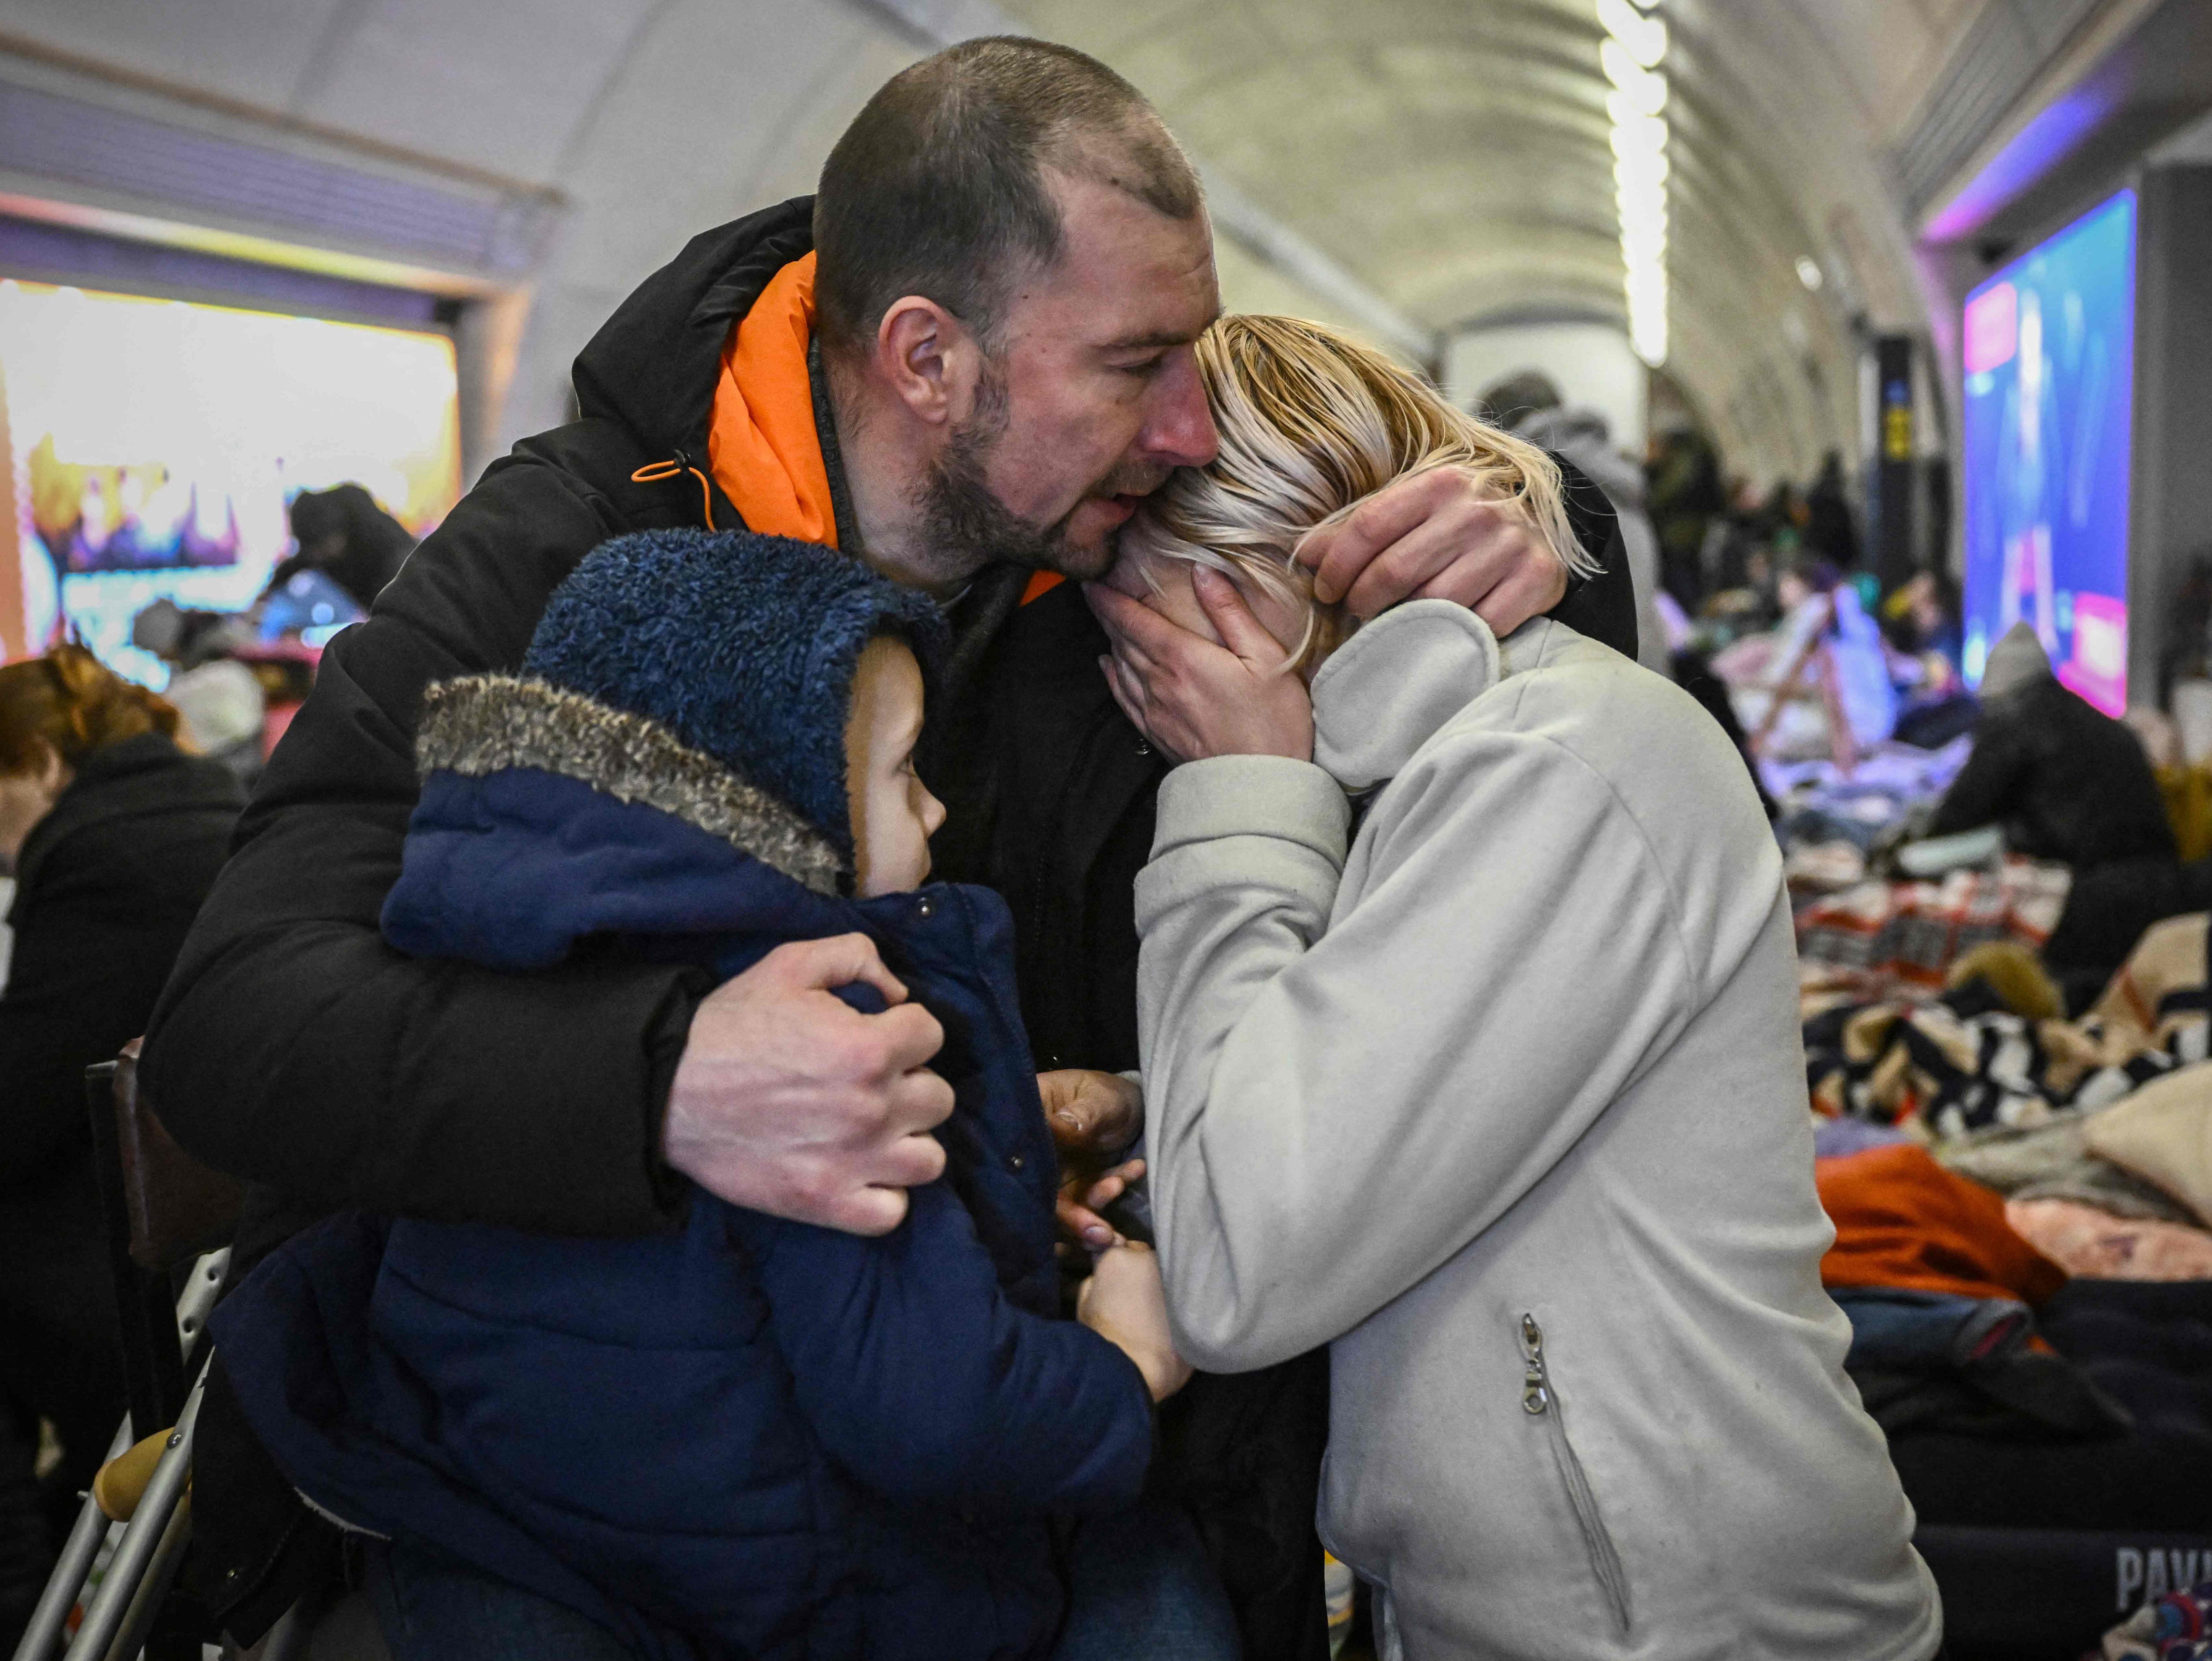 Sergyi Badylevych hugs his wife Natalia and son in an underground station in Kyiv